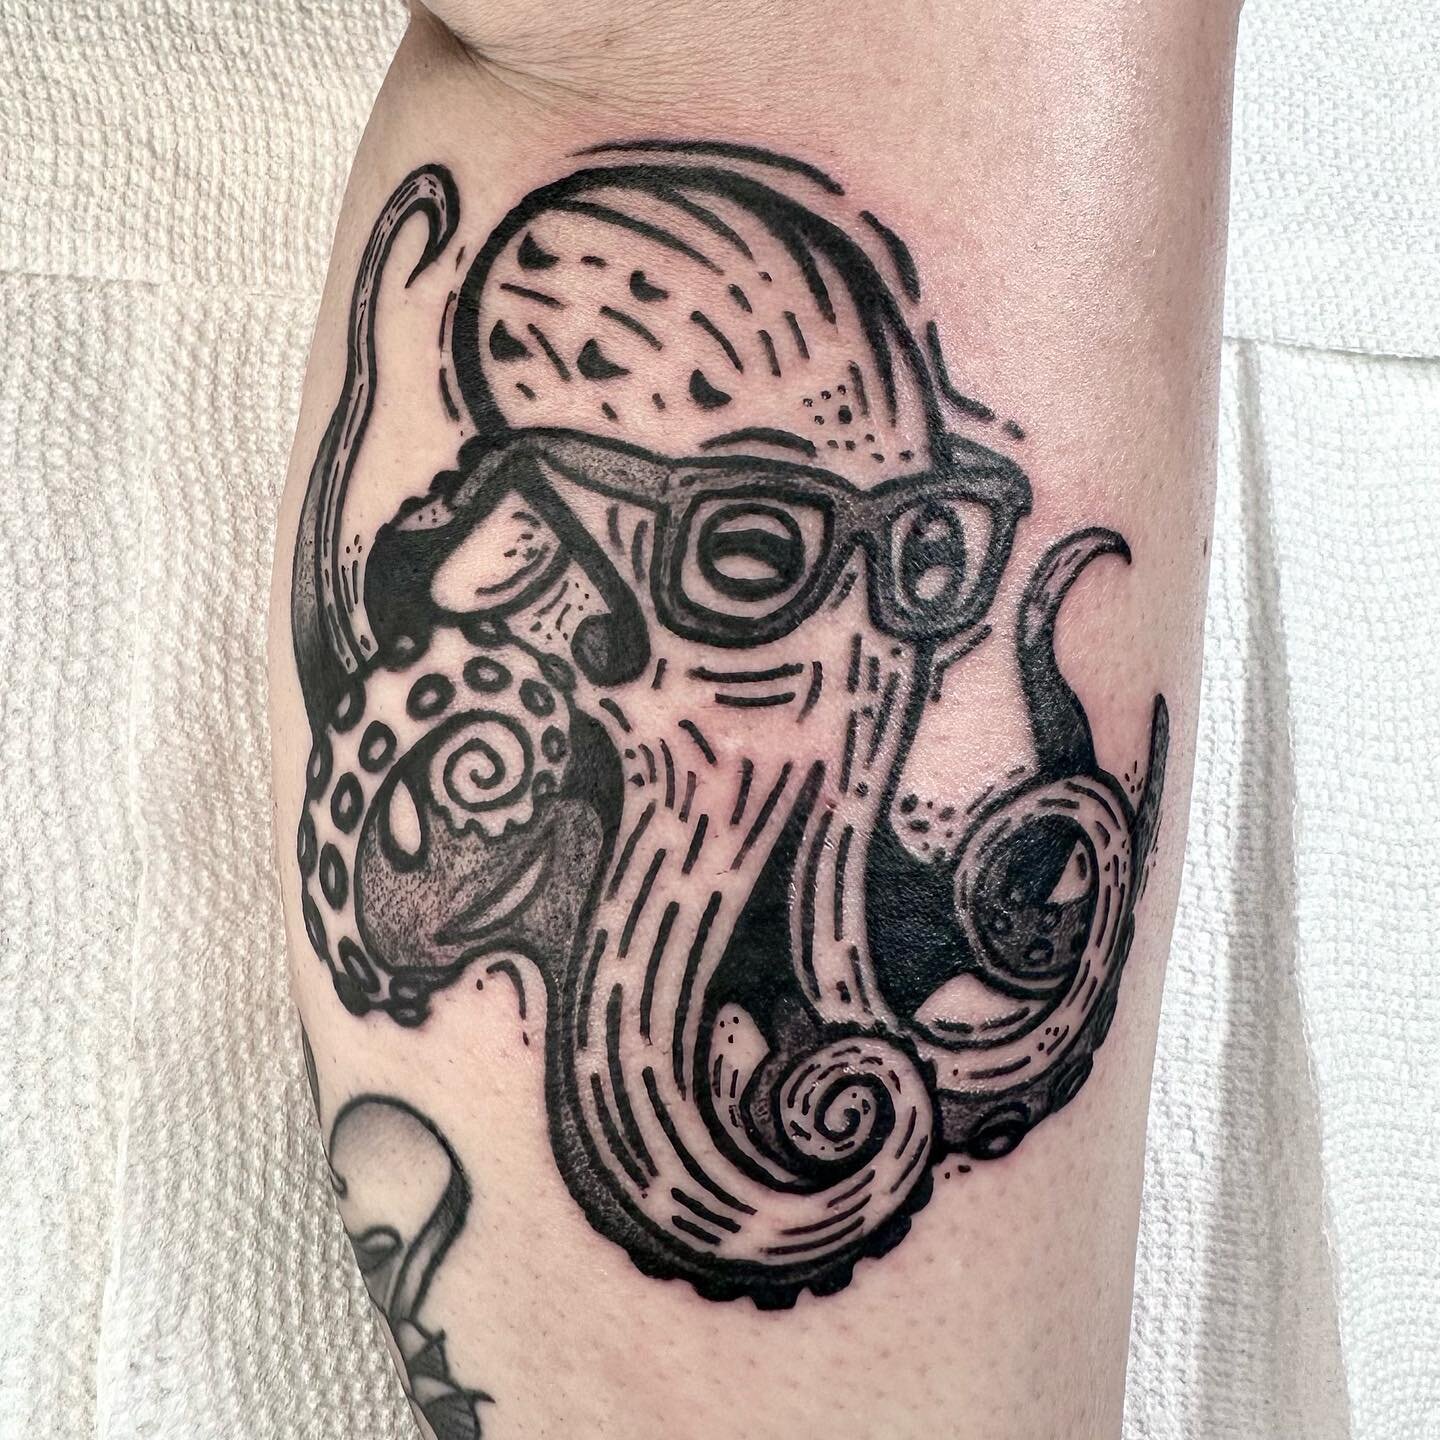 octopus that didn&rsquo;t wanna wear his contacts today, excited to continue adding more elements and new techniques to my tats. dm me so we can do something cool.
.
.
.
.
.
.
.
.
.
.
.
.
#octopus #octopustattoo #tattooshop #tattoo #allegory #allegor